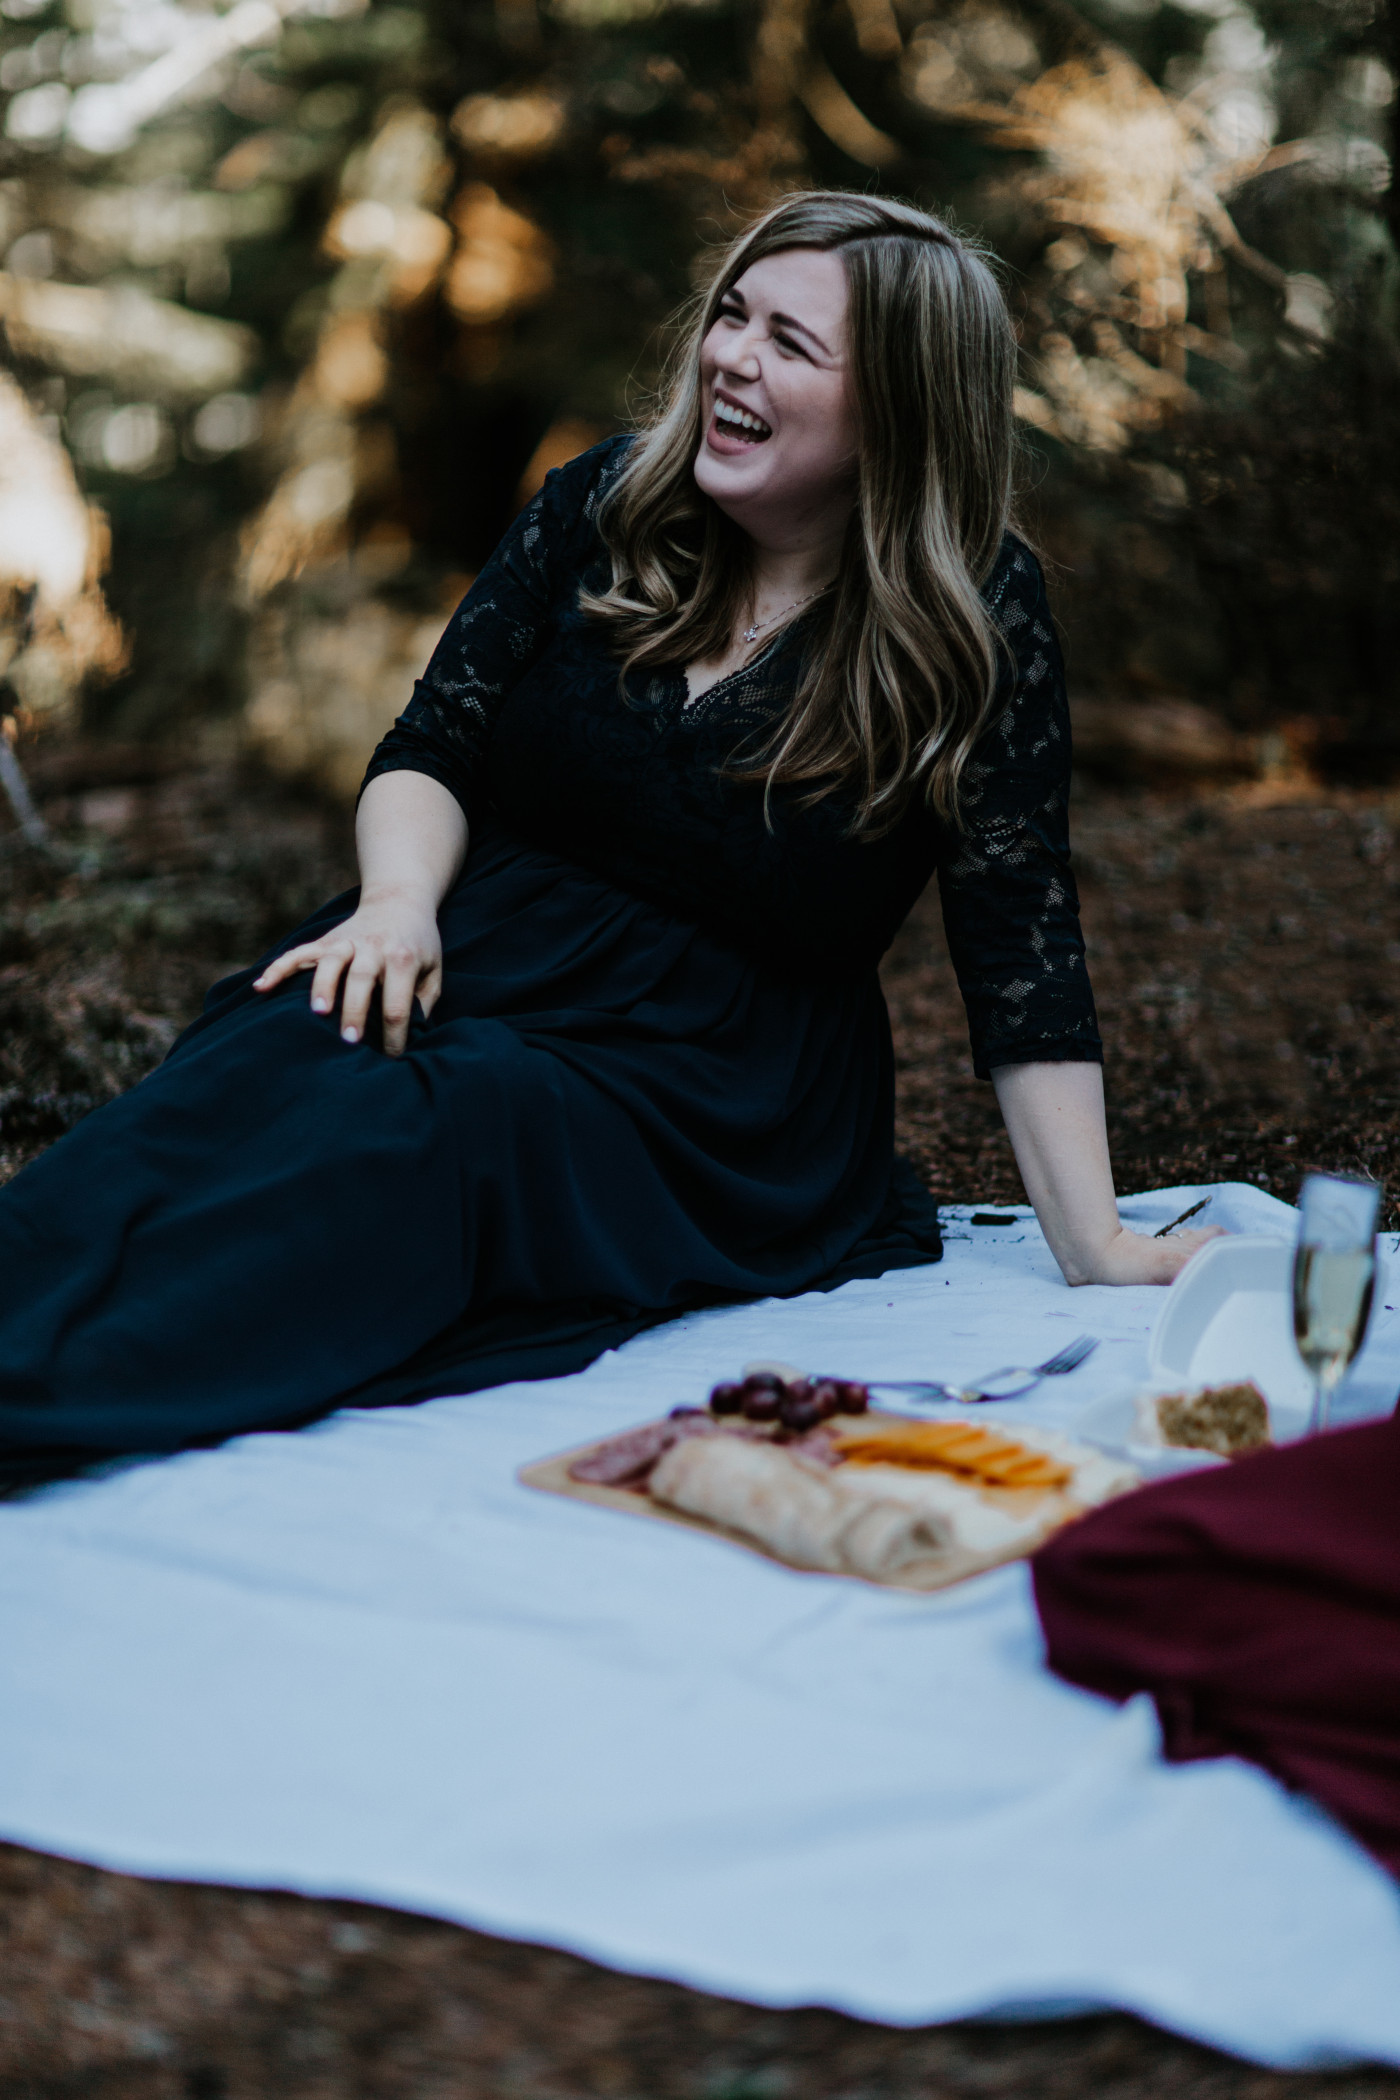 Tiffany shakes laughs. Elopement photography at the Columbia River Gorge by Sienna Plus Josh.